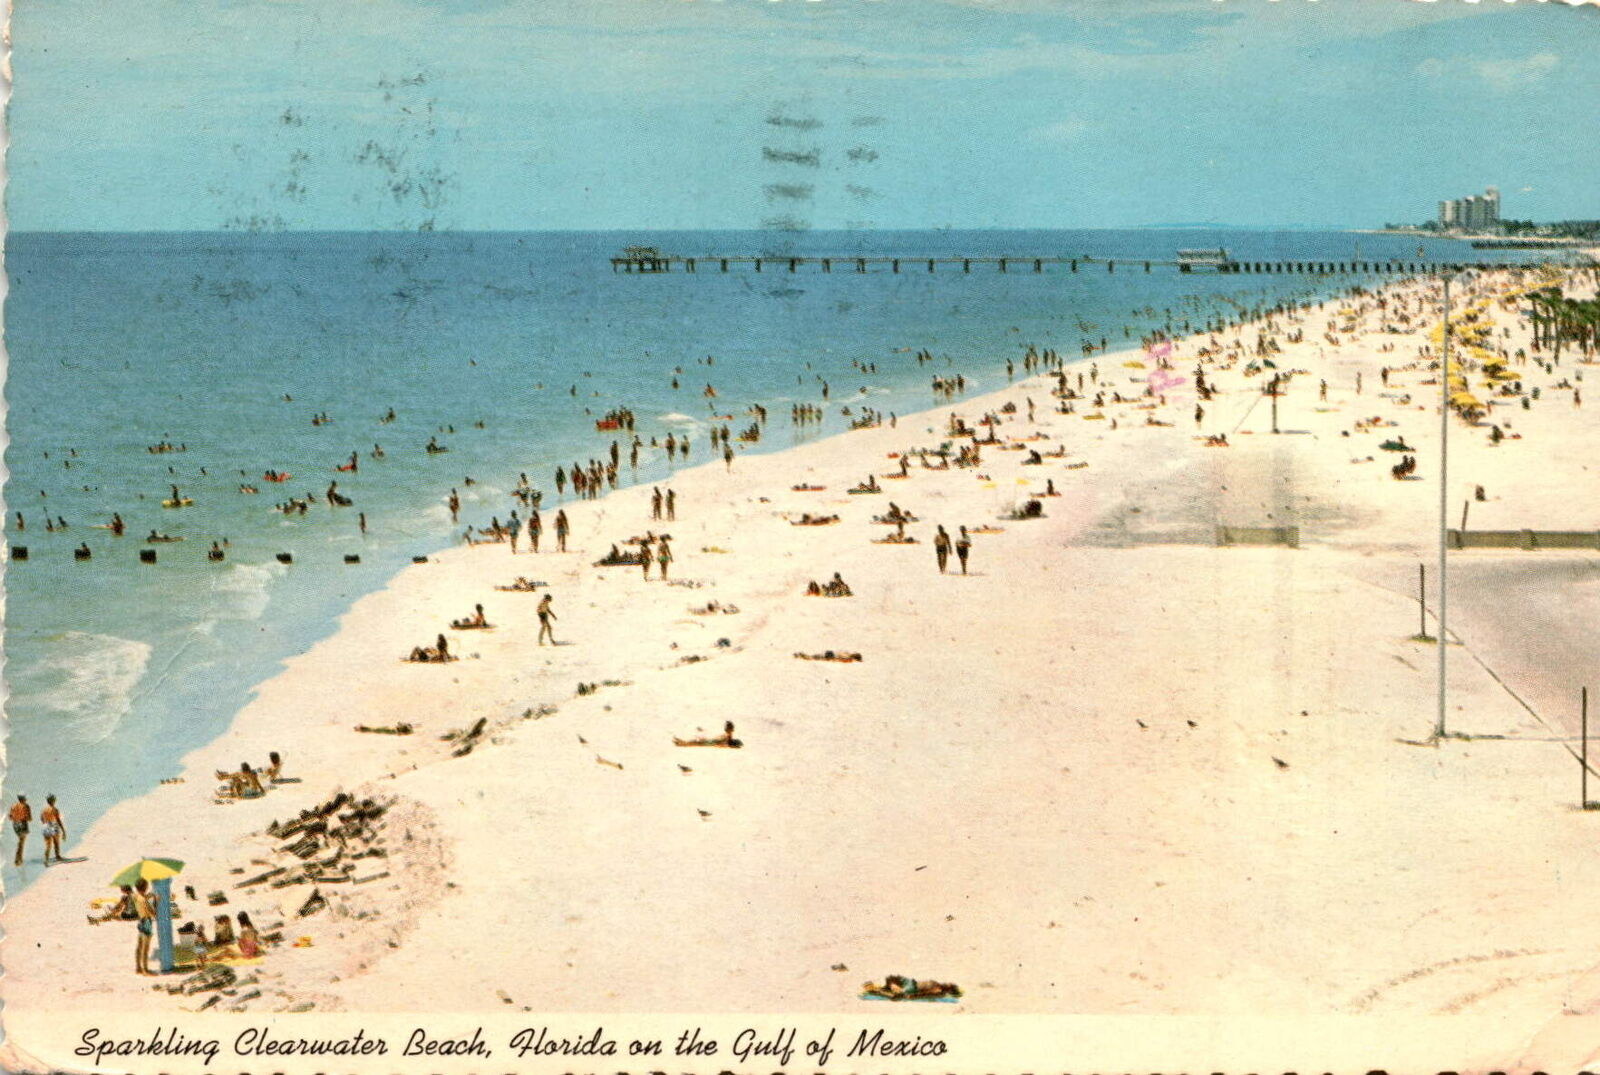 Vintage Clearwater Beach postcard from Gulf of Mexico.